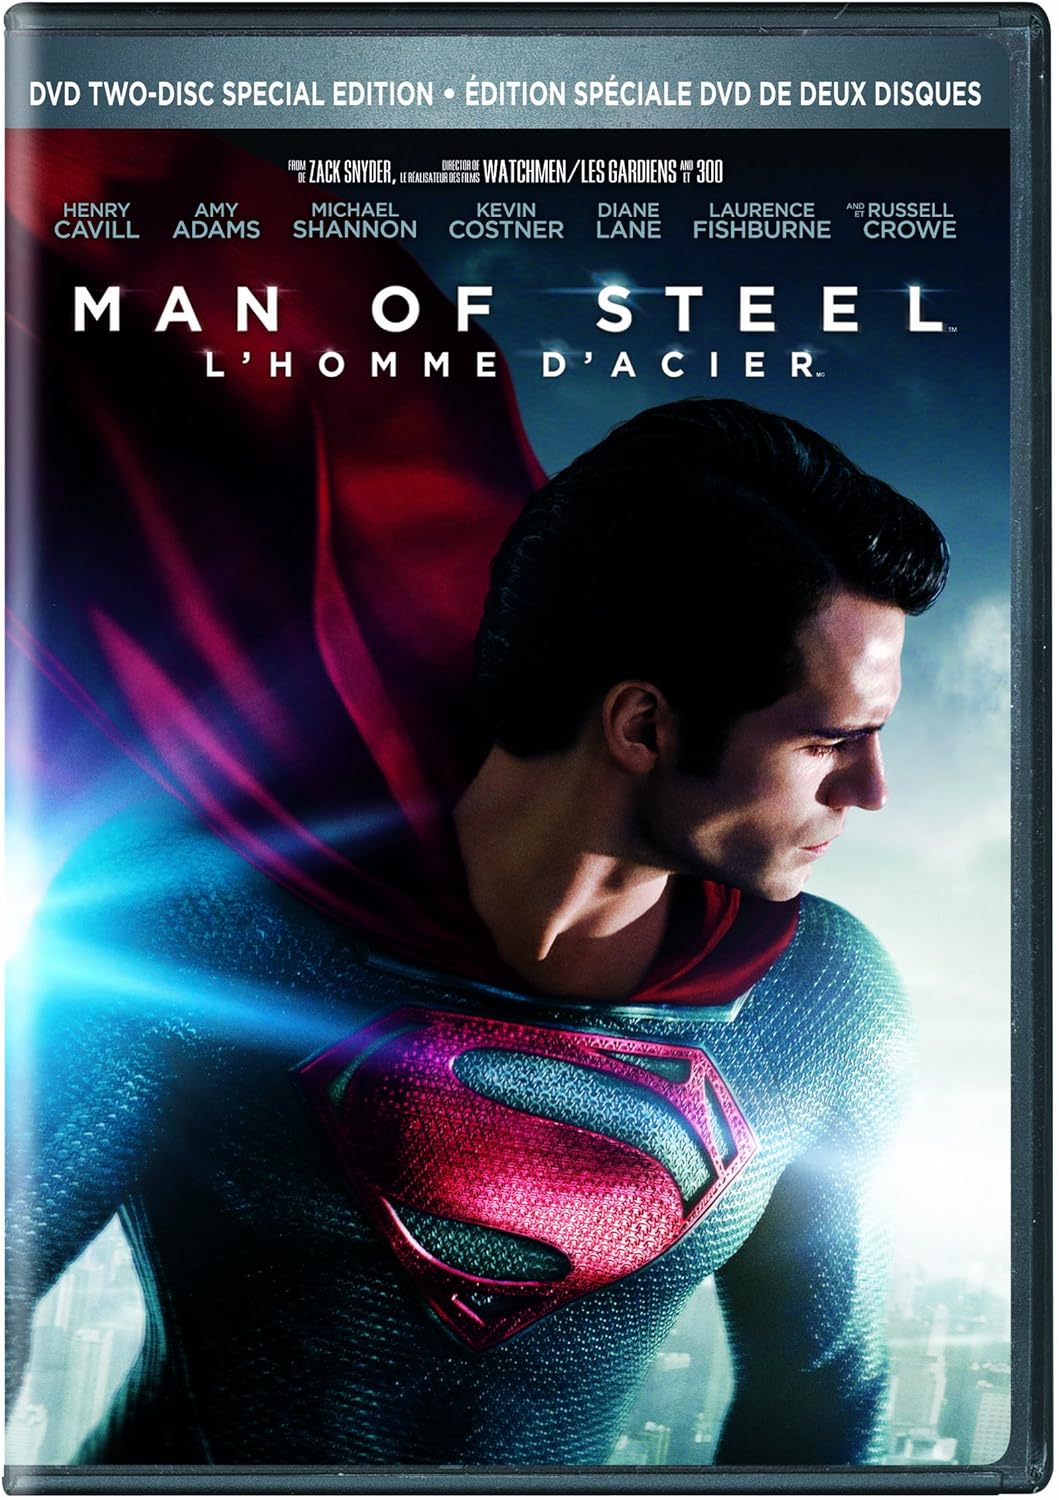 Man of Steel (Two-Disc Special Edition) (Bilingual) [DVD]